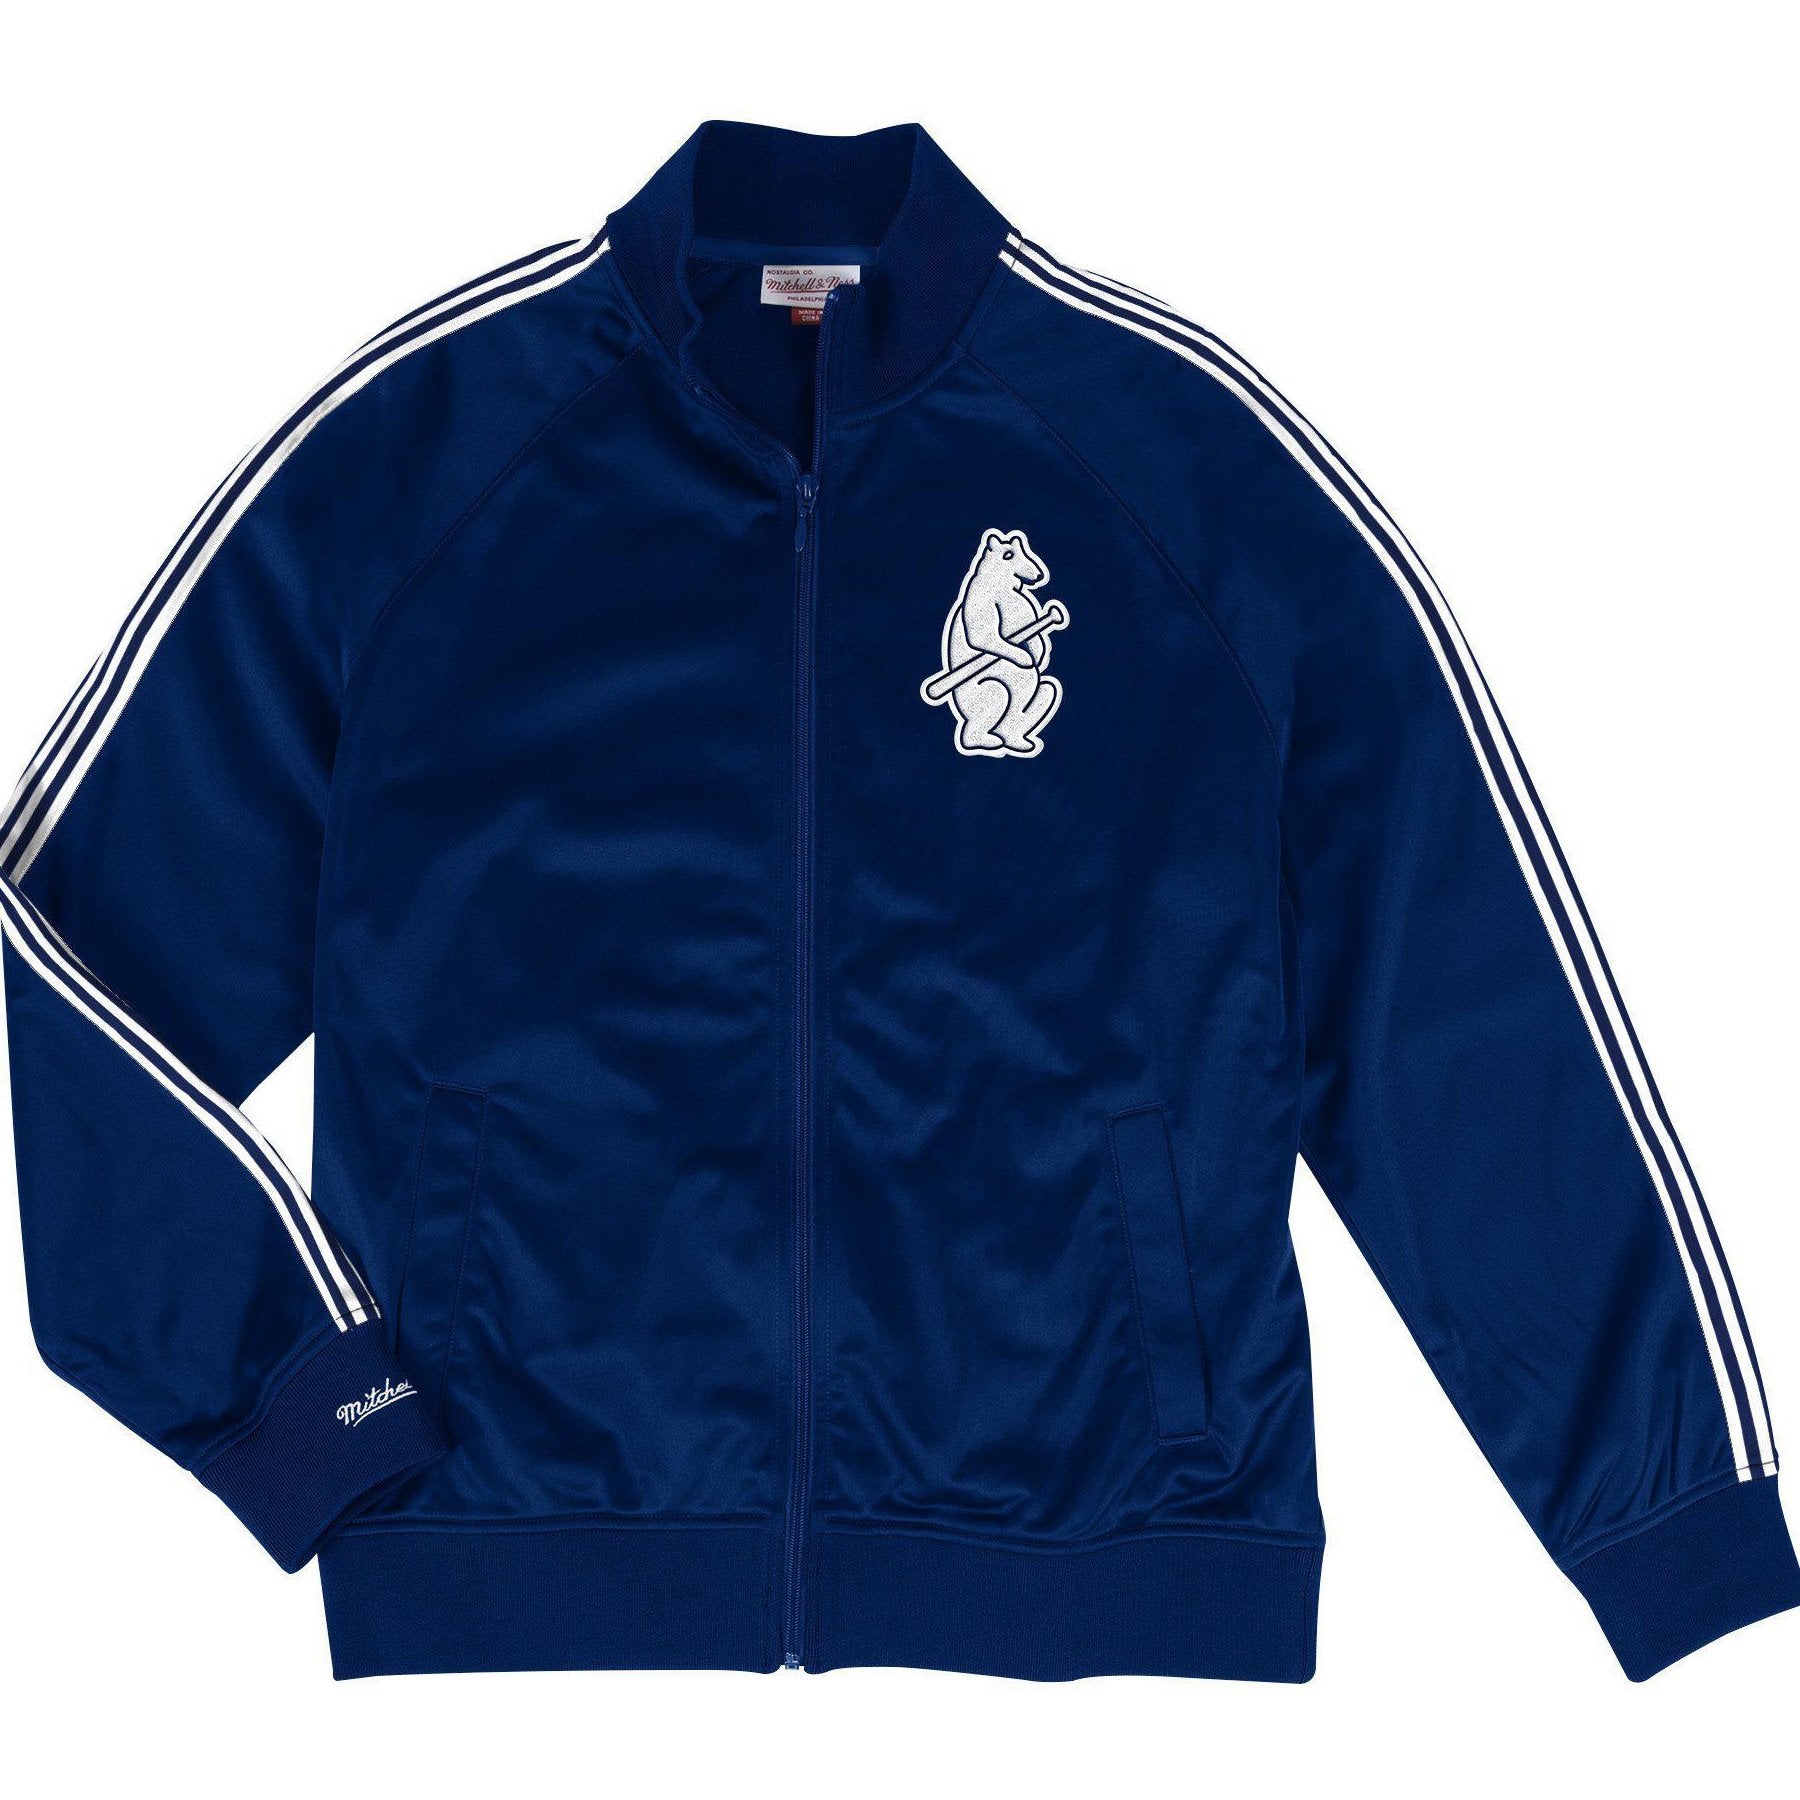 Mitchell & Ness Navy MLB Chicago Cubs Track Jacket, Blue